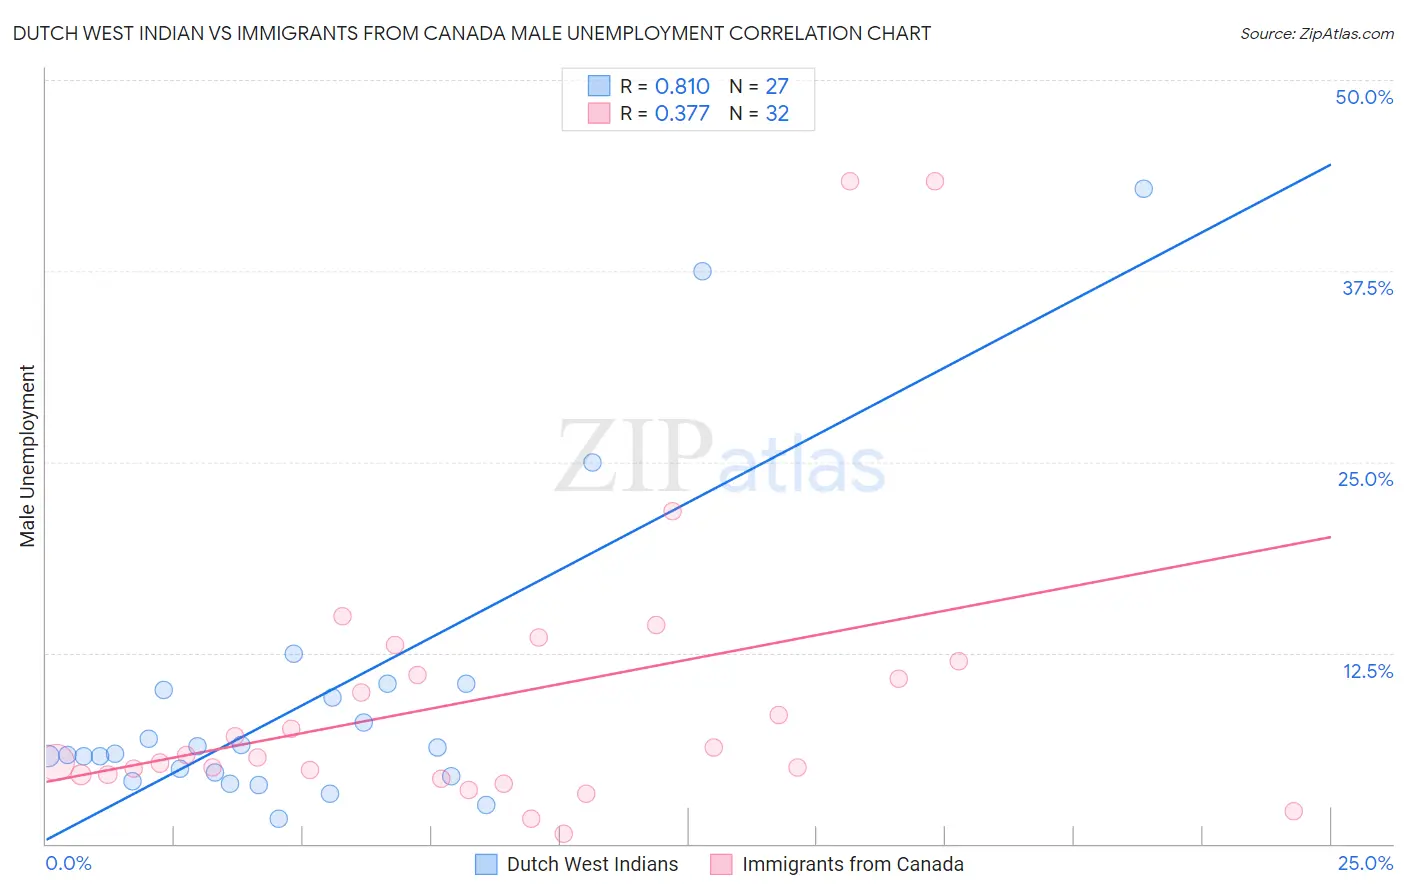 Dutch West Indian vs Immigrants from Canada Male Unemployment